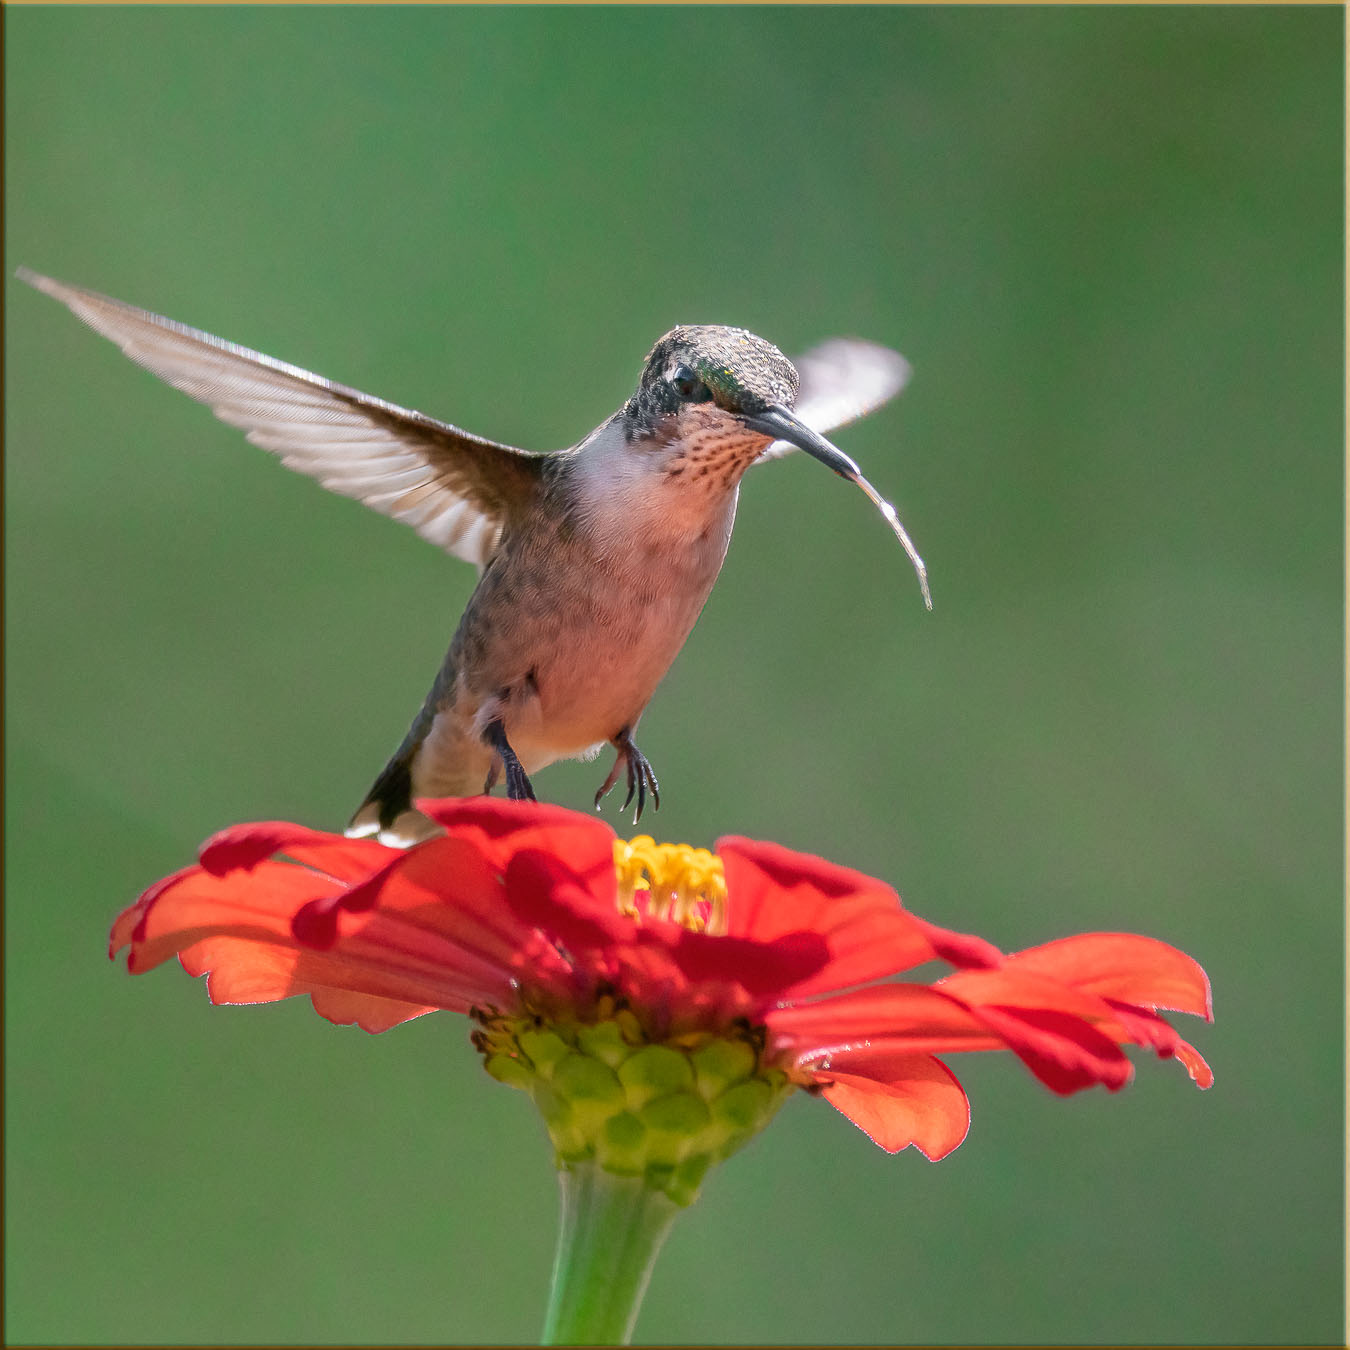 Ruby-throated Hummingbird in flight with tongue out